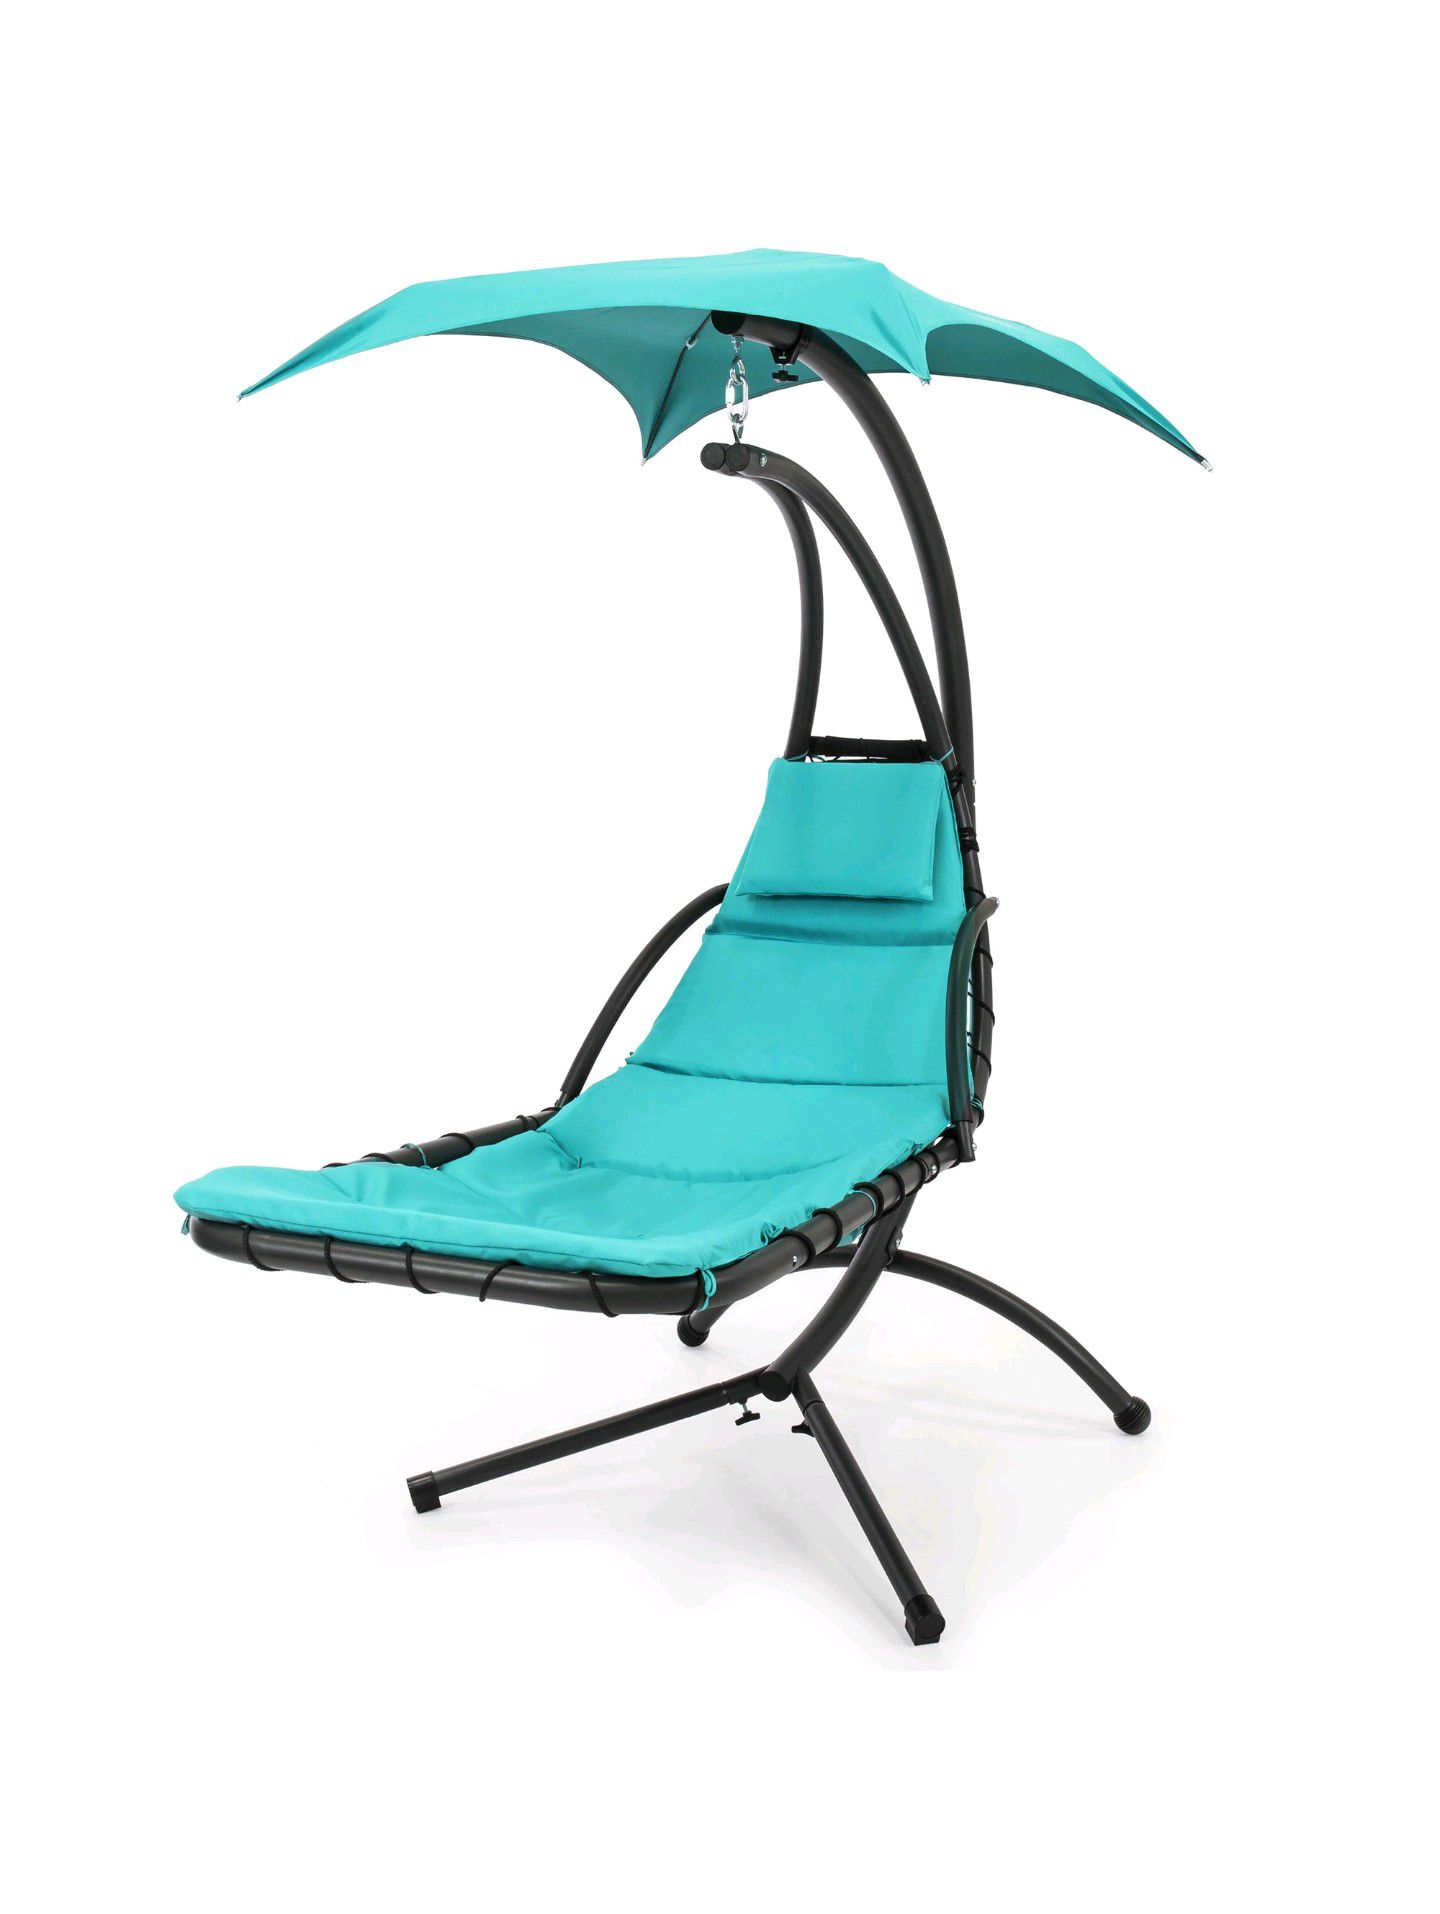 Hanging Chaise Lounge Canopy Chair